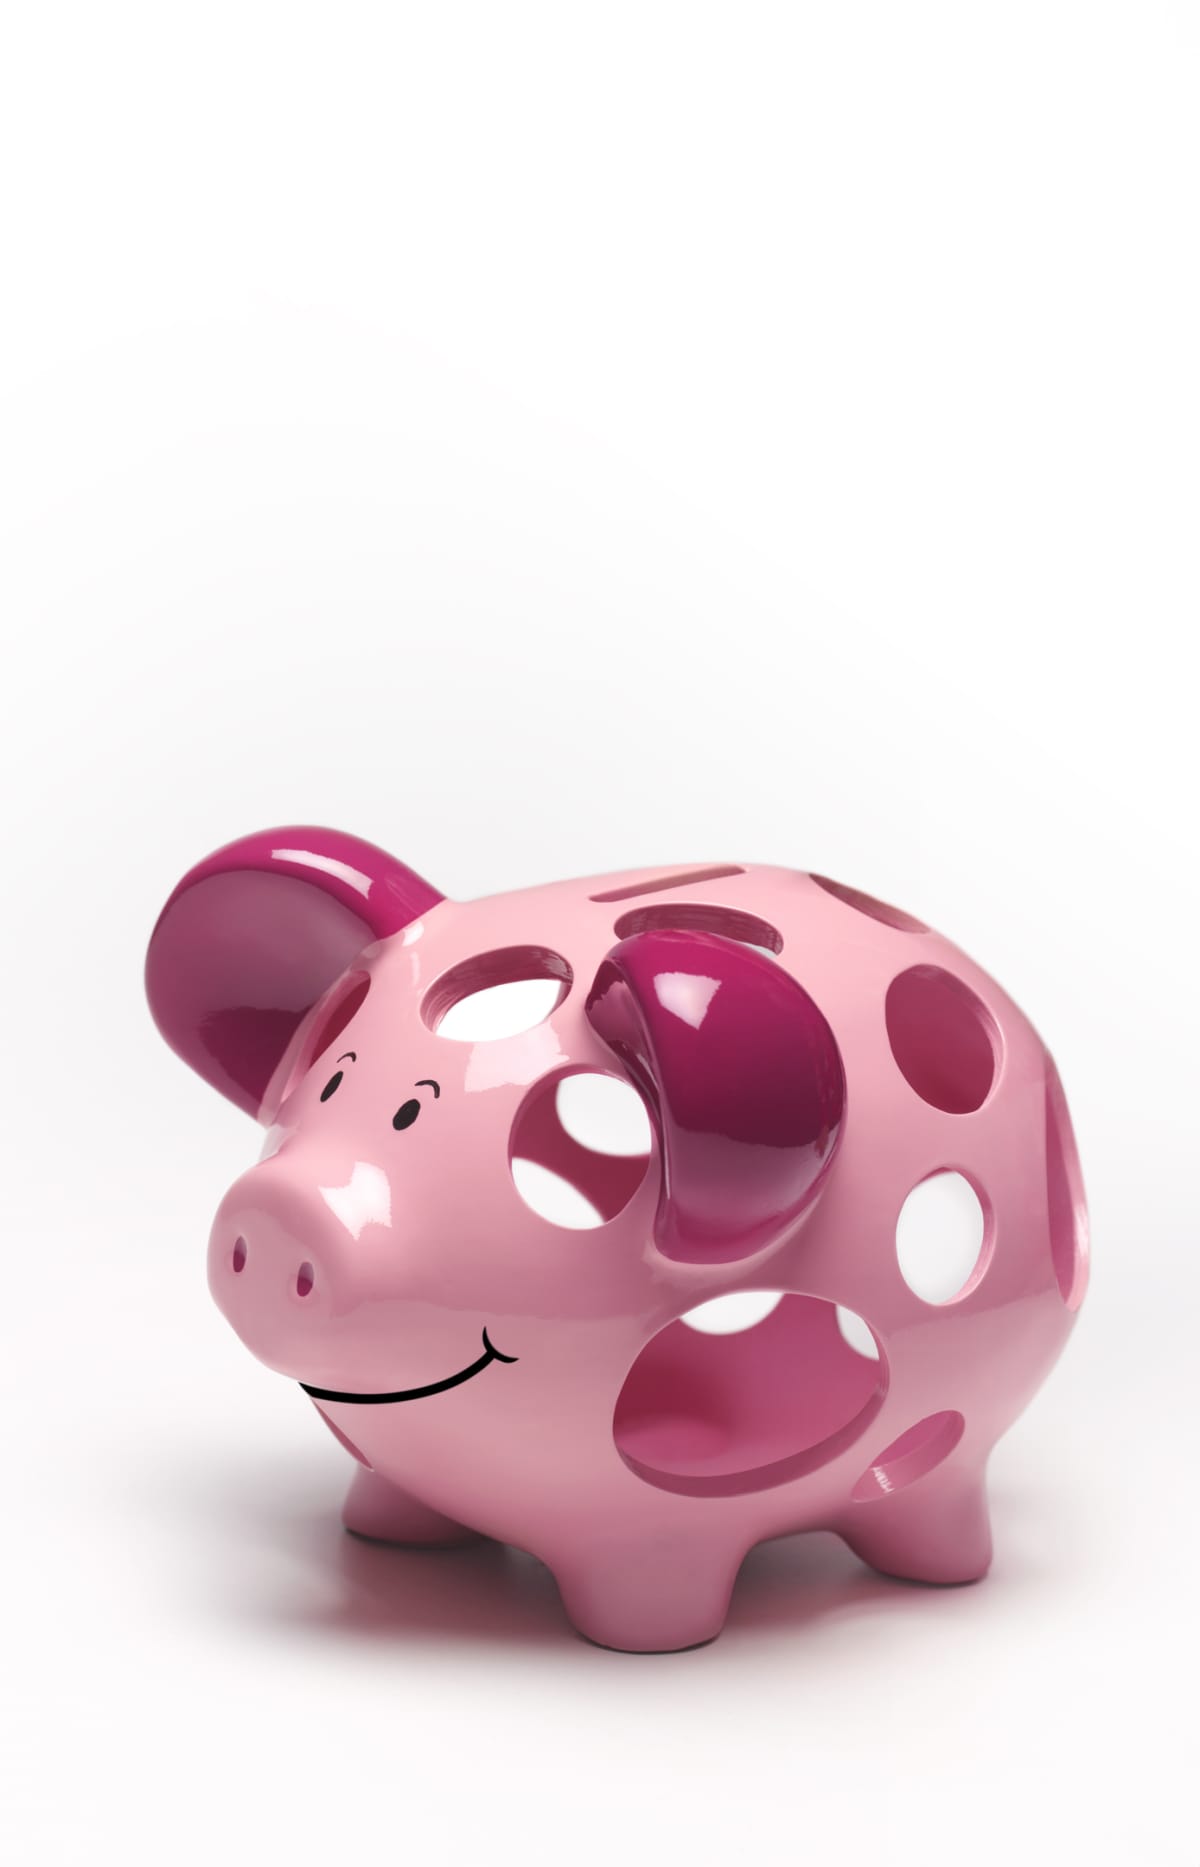 A pink piggy bank with large holes in it on a white background